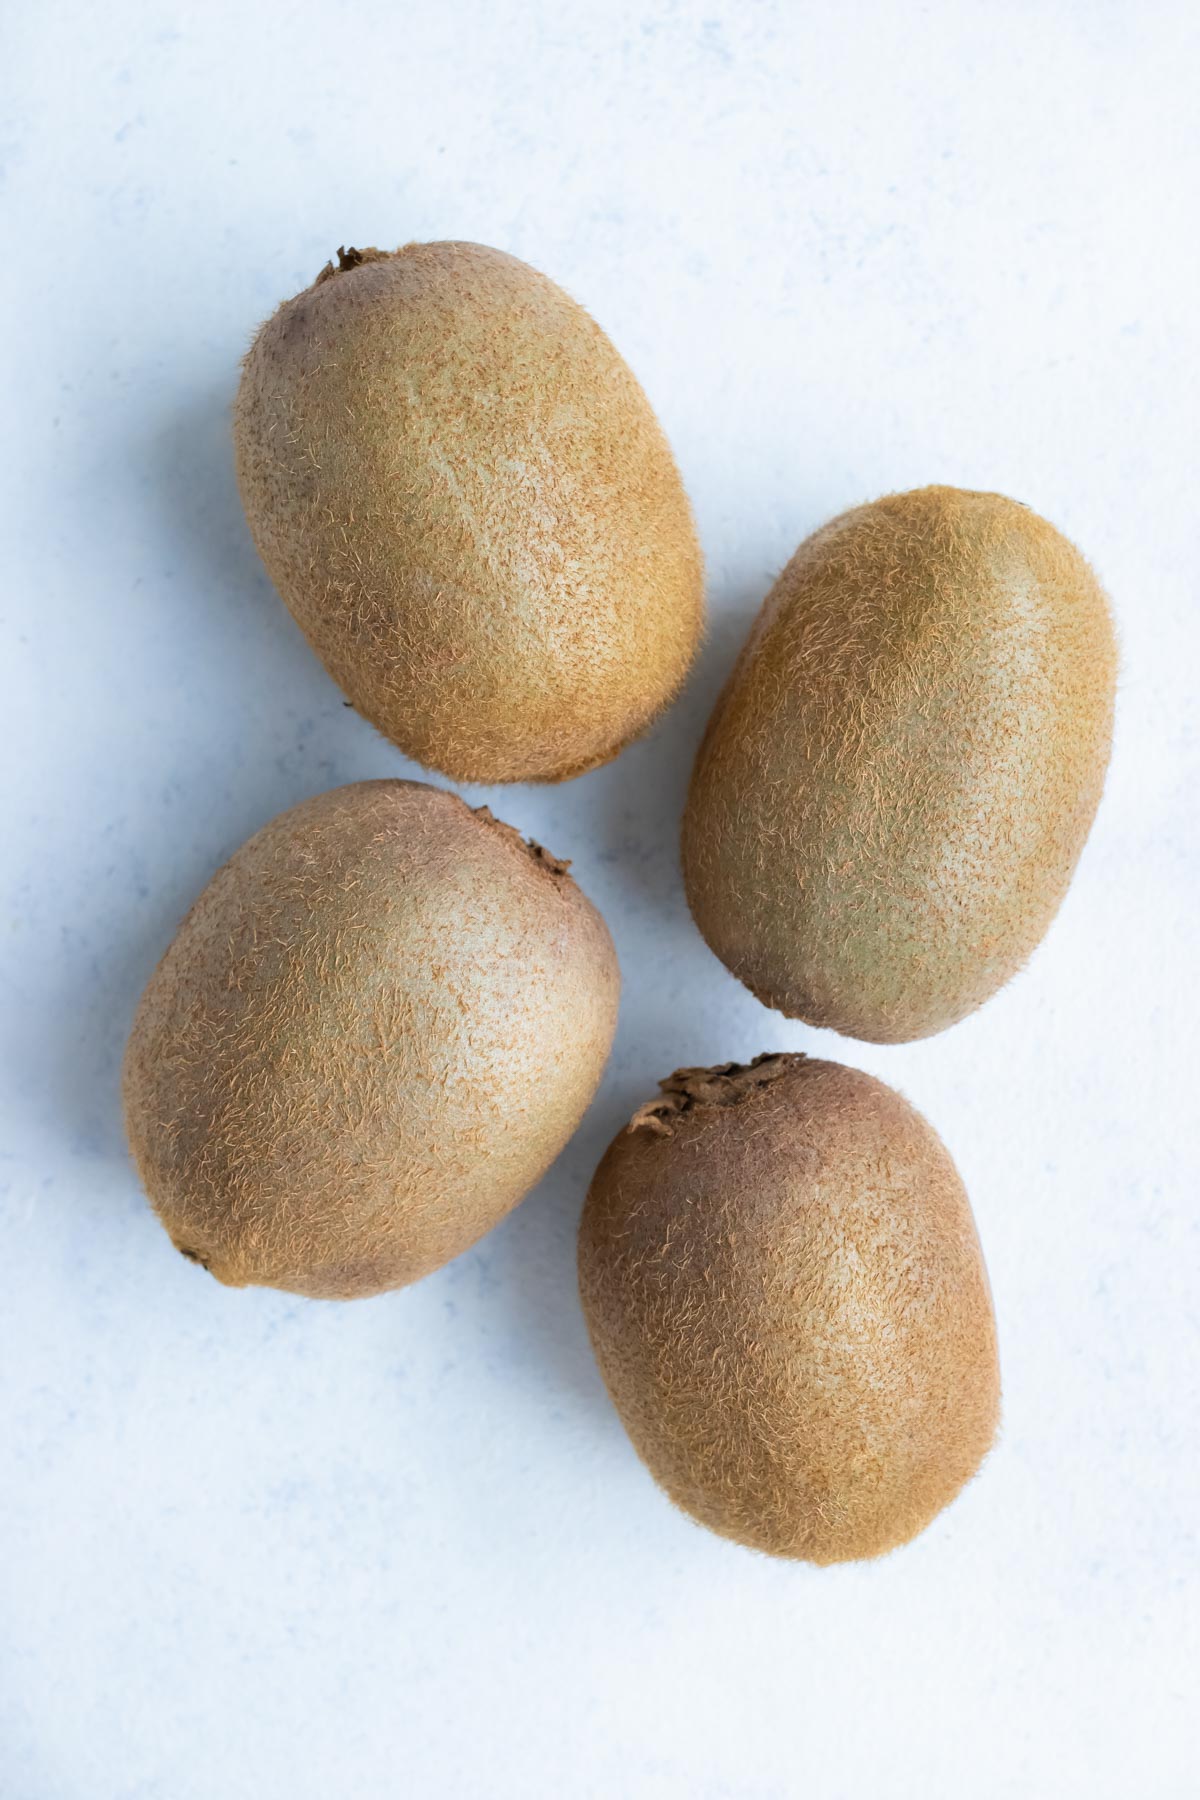 Four kiwi with skins are placed on the counter.